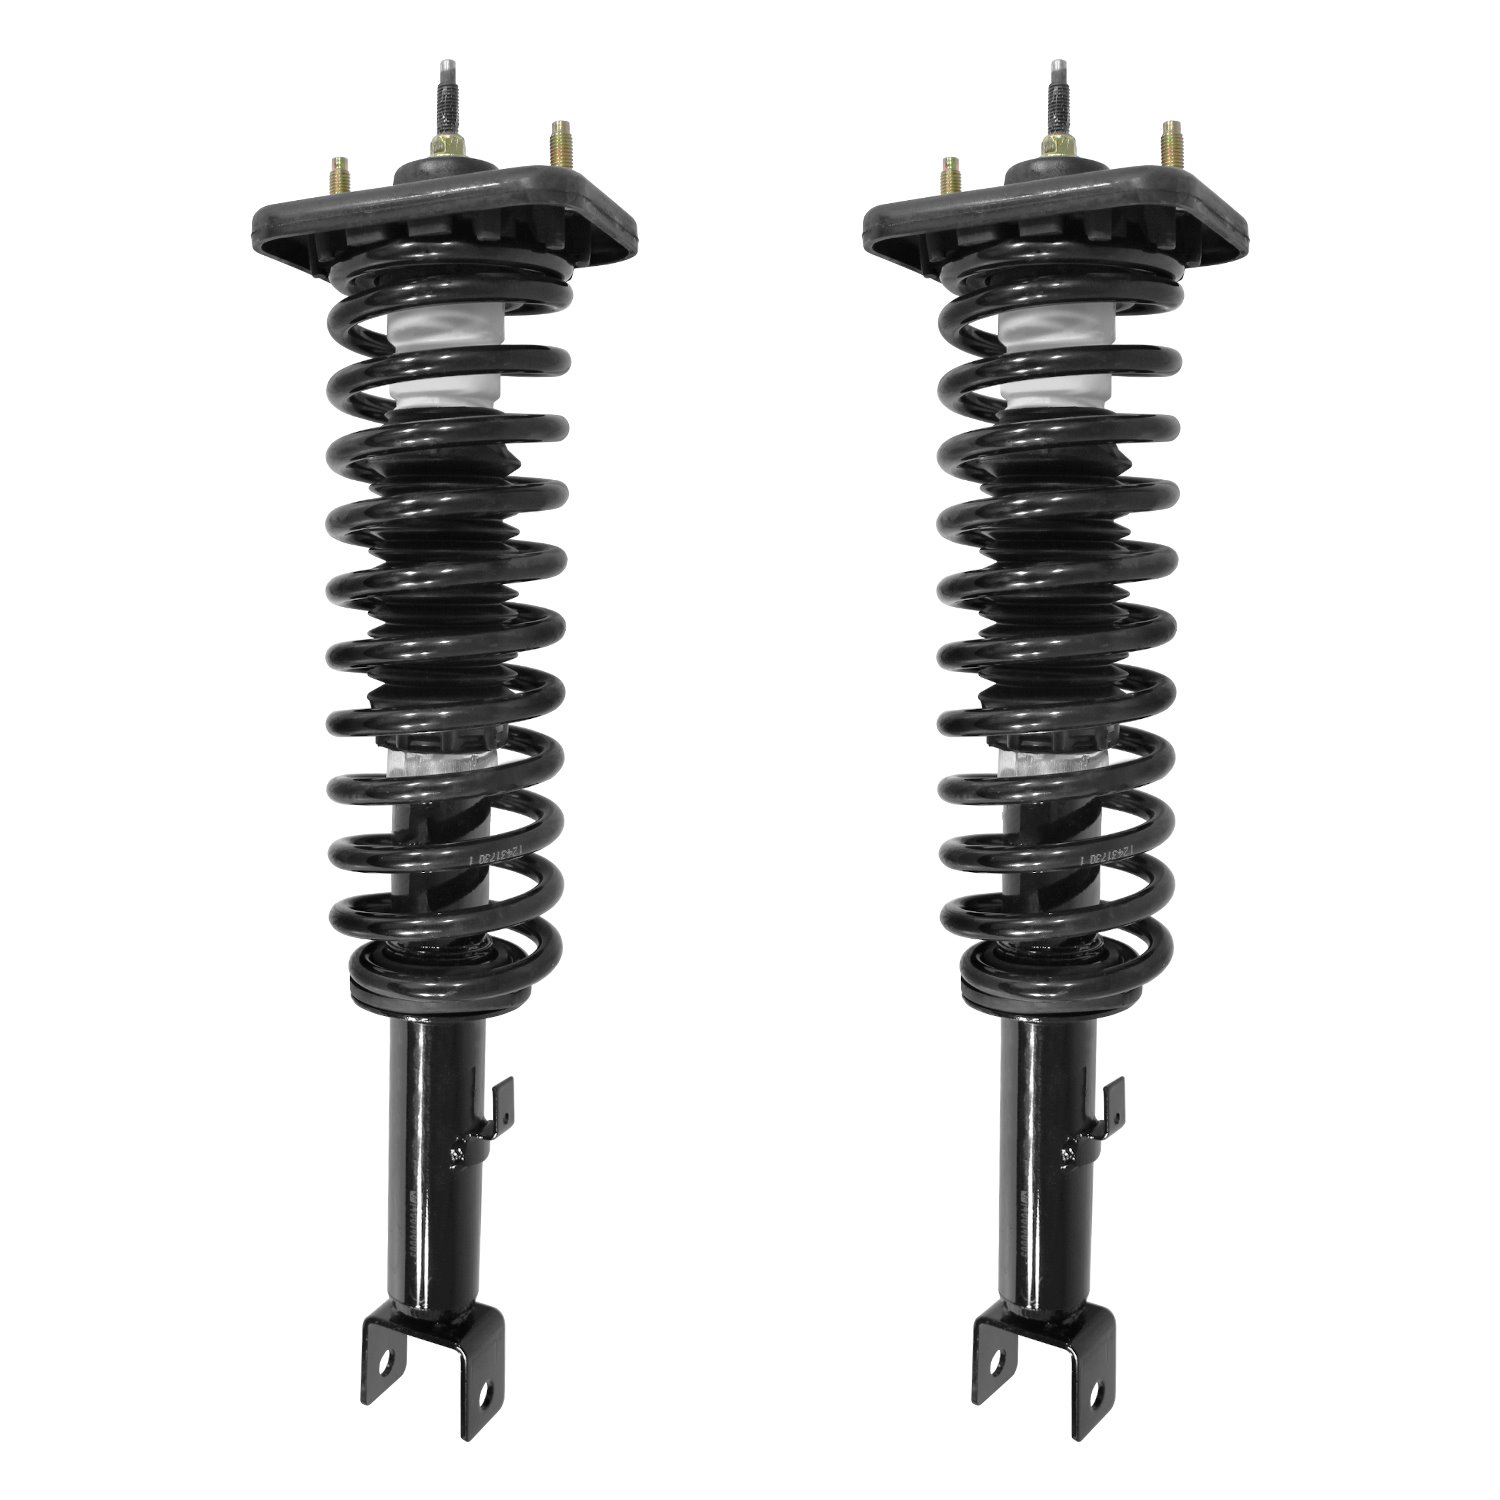 2-15370-001 Suspension Strut & Coil Spring Assembly Set Fits Select Chrysler Cirrus, Dodge Stratus, Plymouth Breeze